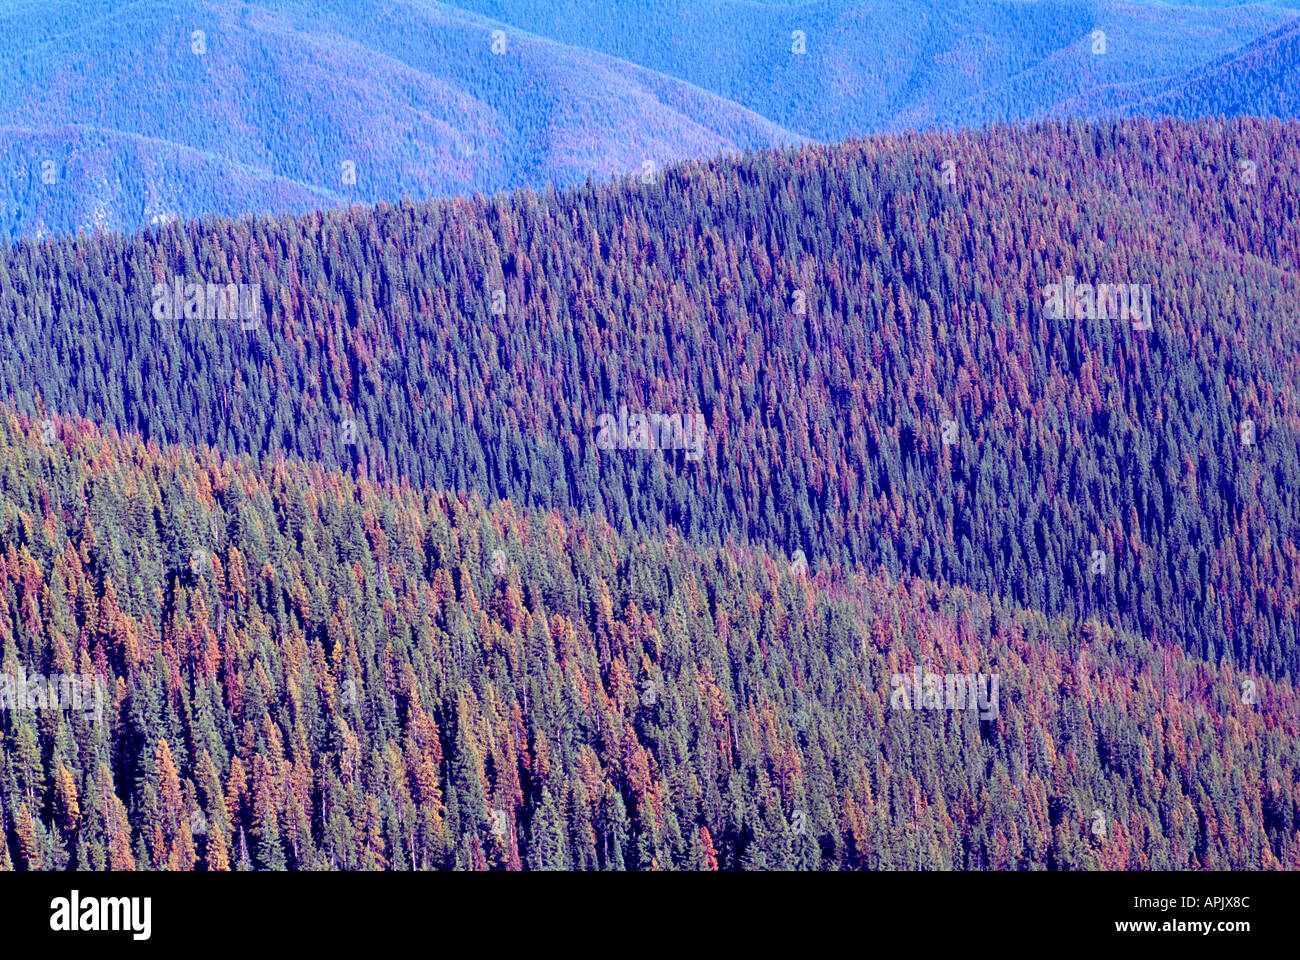 Dying Lodgepole Pine Trees (Pinus contorta) in Forest infested by Mountain Pine Beetle Infestation, BC, British Columbia, Canada Stock Photo